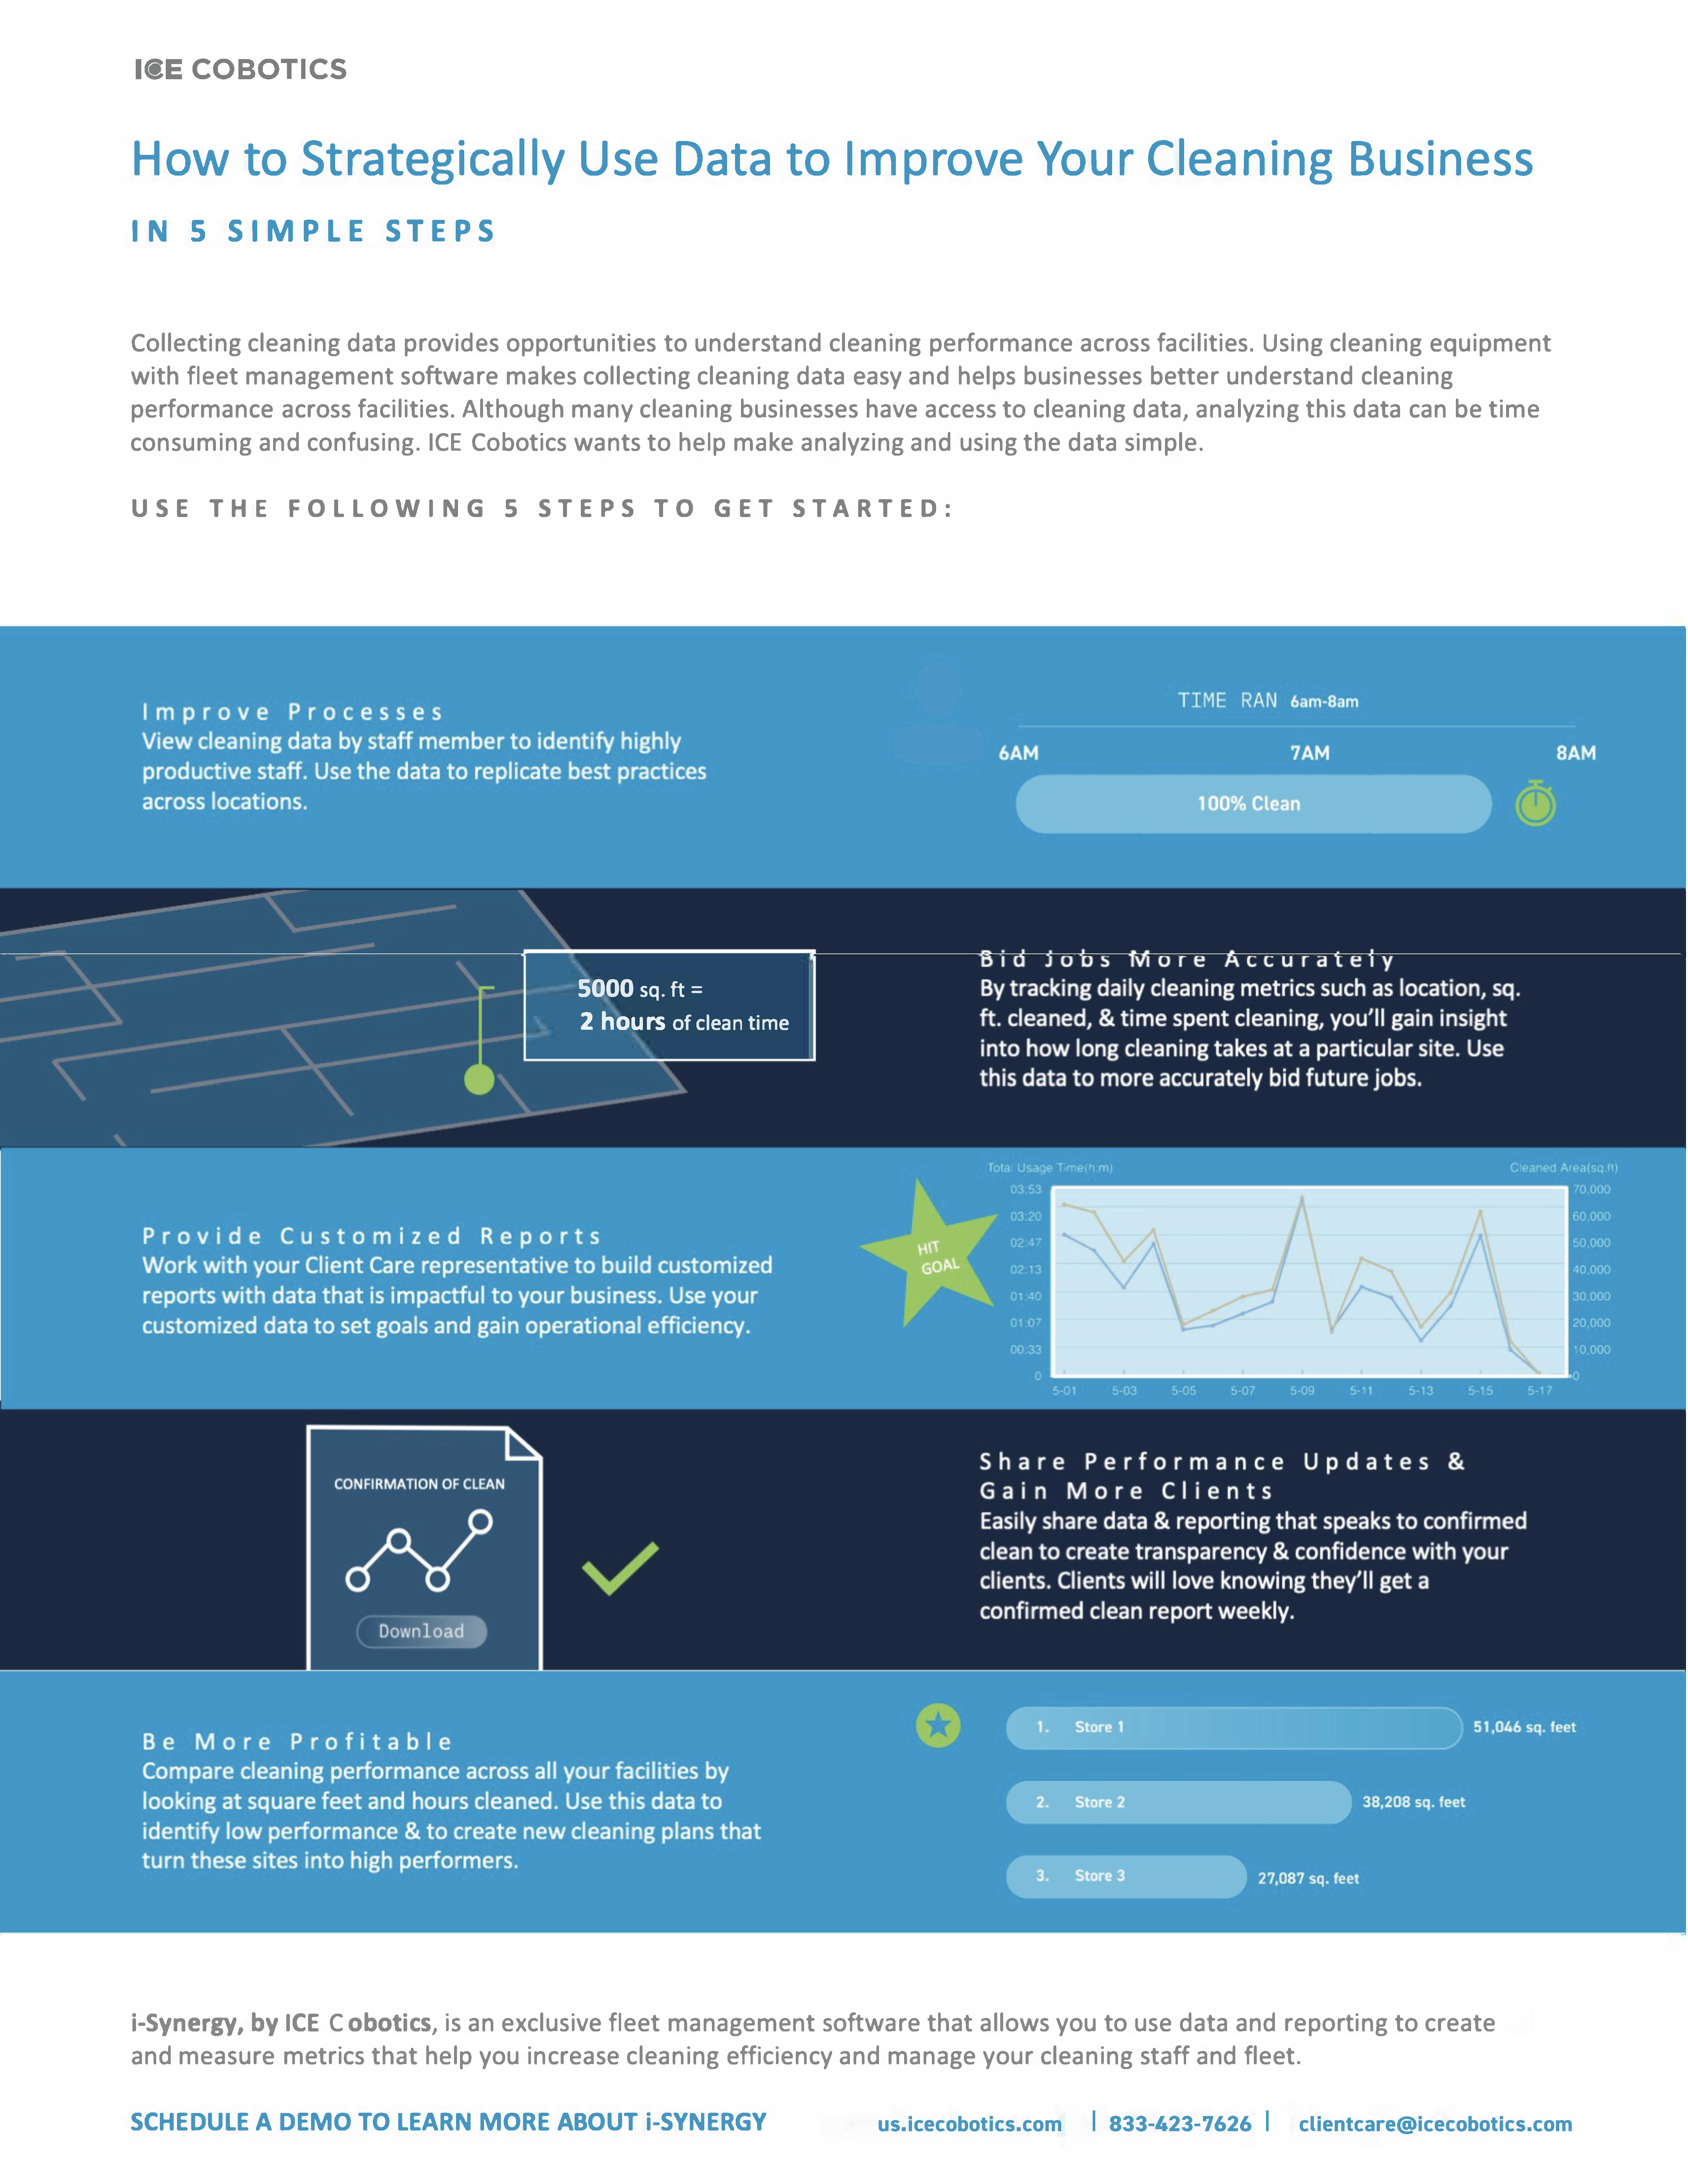 How to Use Data Strategically Infographic 